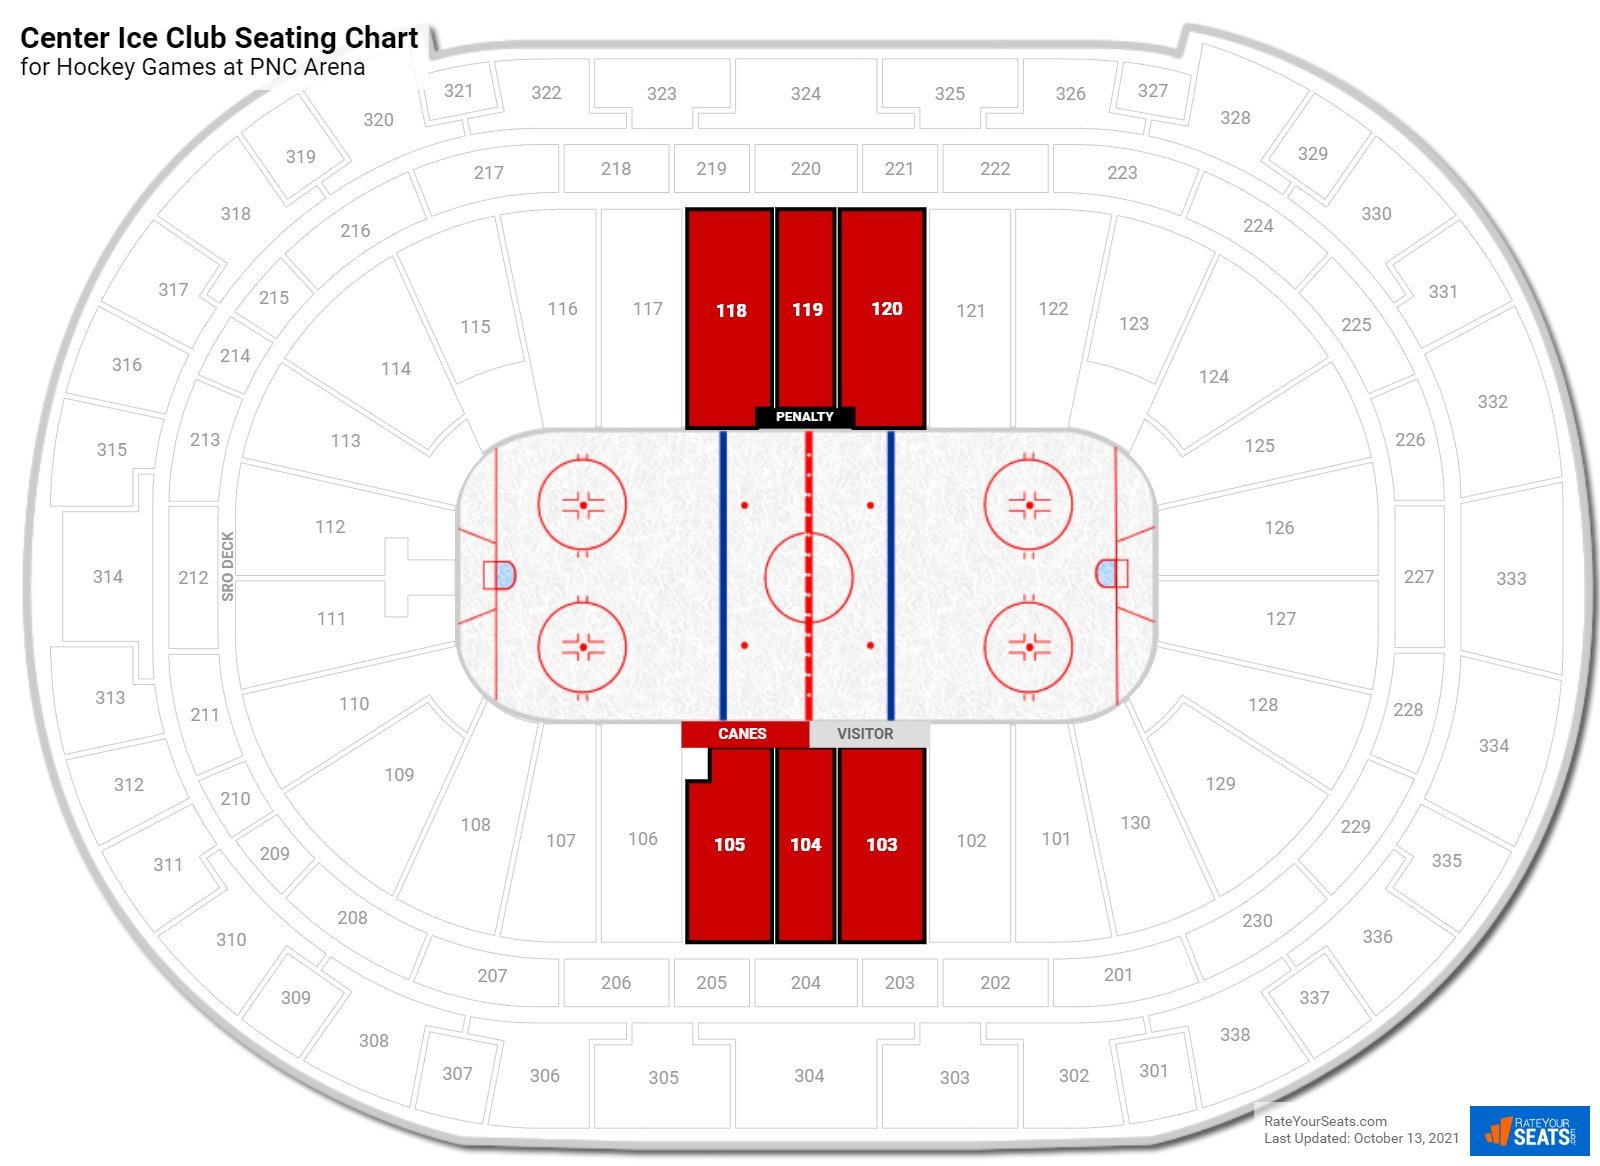 Hockey Center Ice Club Seating Chart at PNC Arena